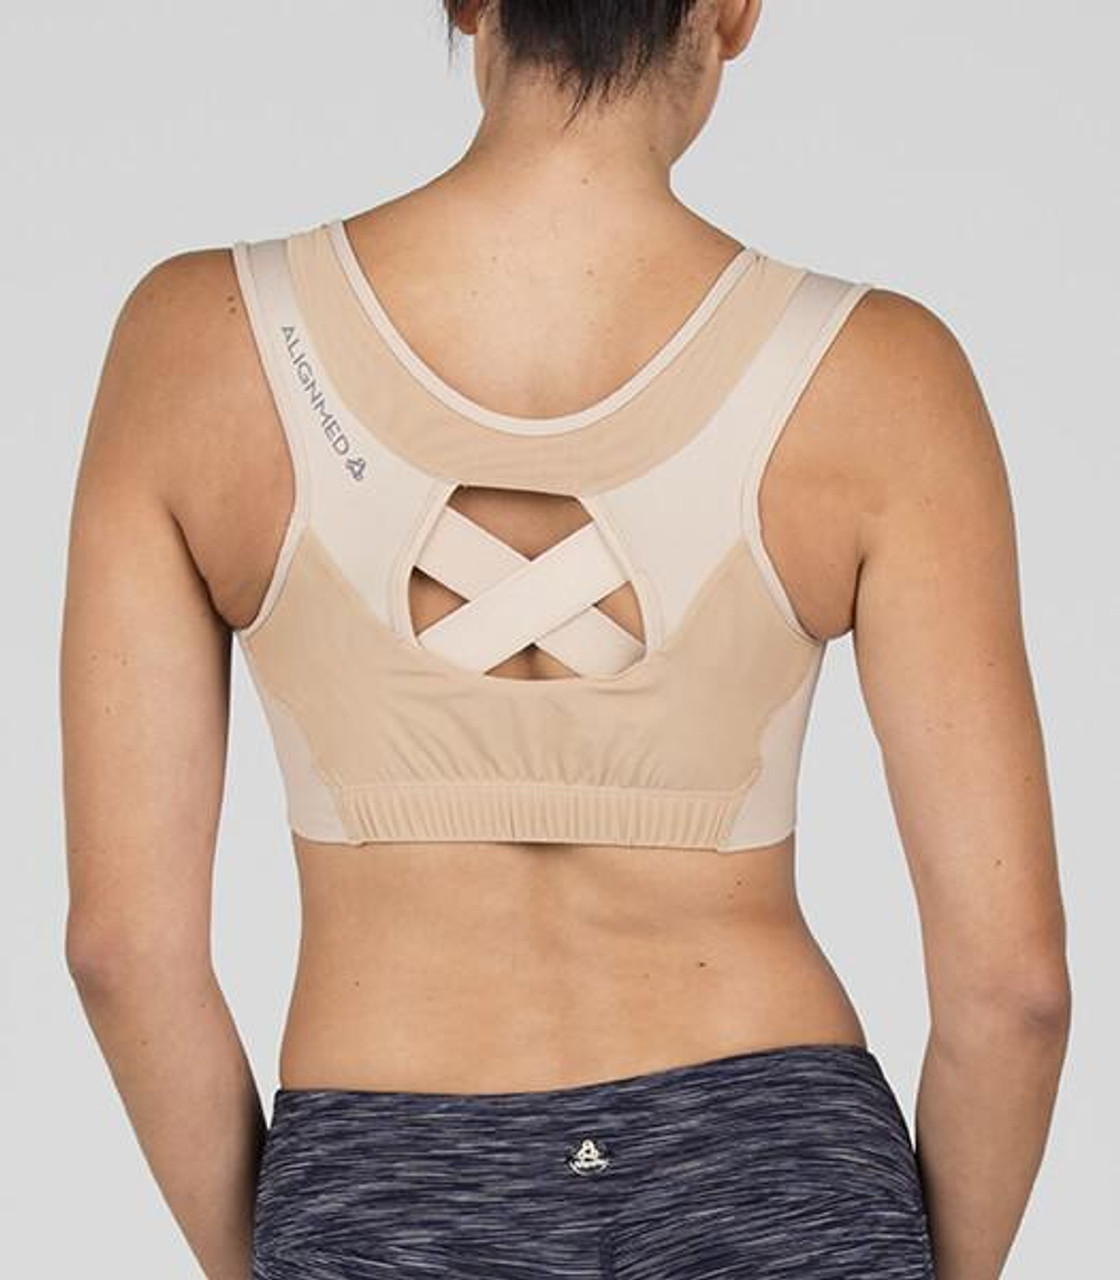 Alignmed - 🧘‍♀️ Our Pullover Posture Sports Bra and